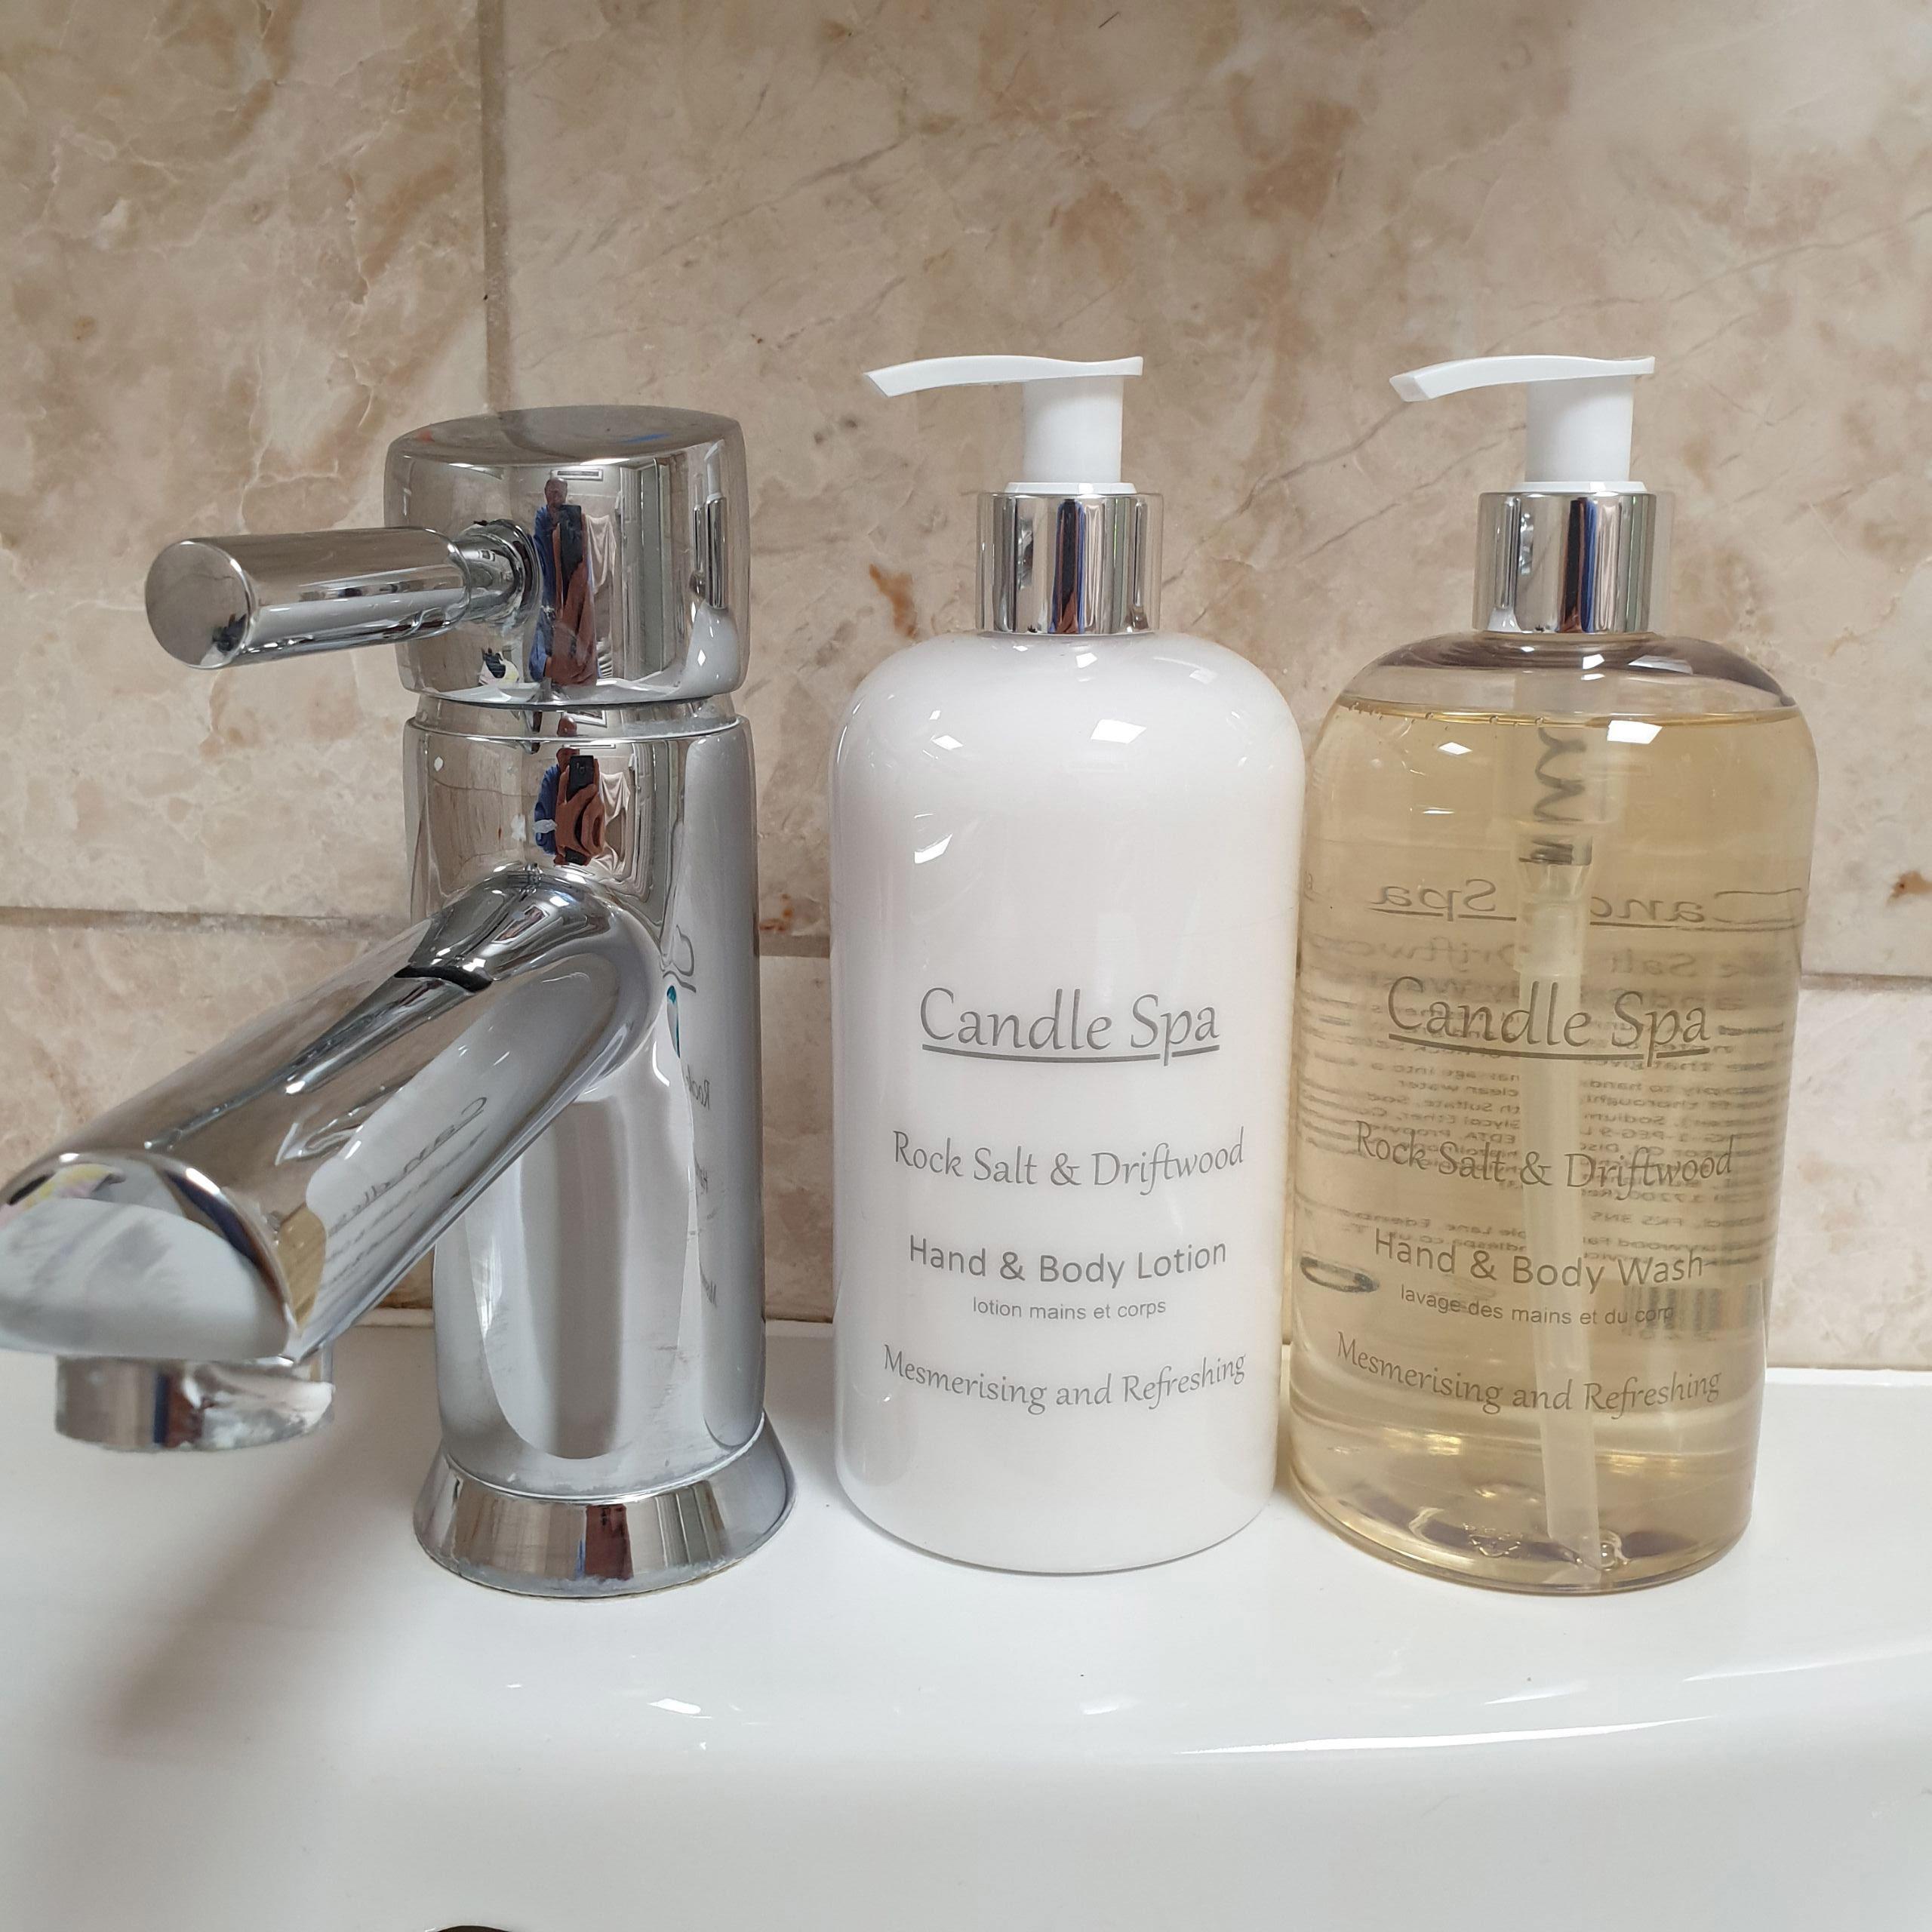 Candle Spa Hand & Body Wash combo sets